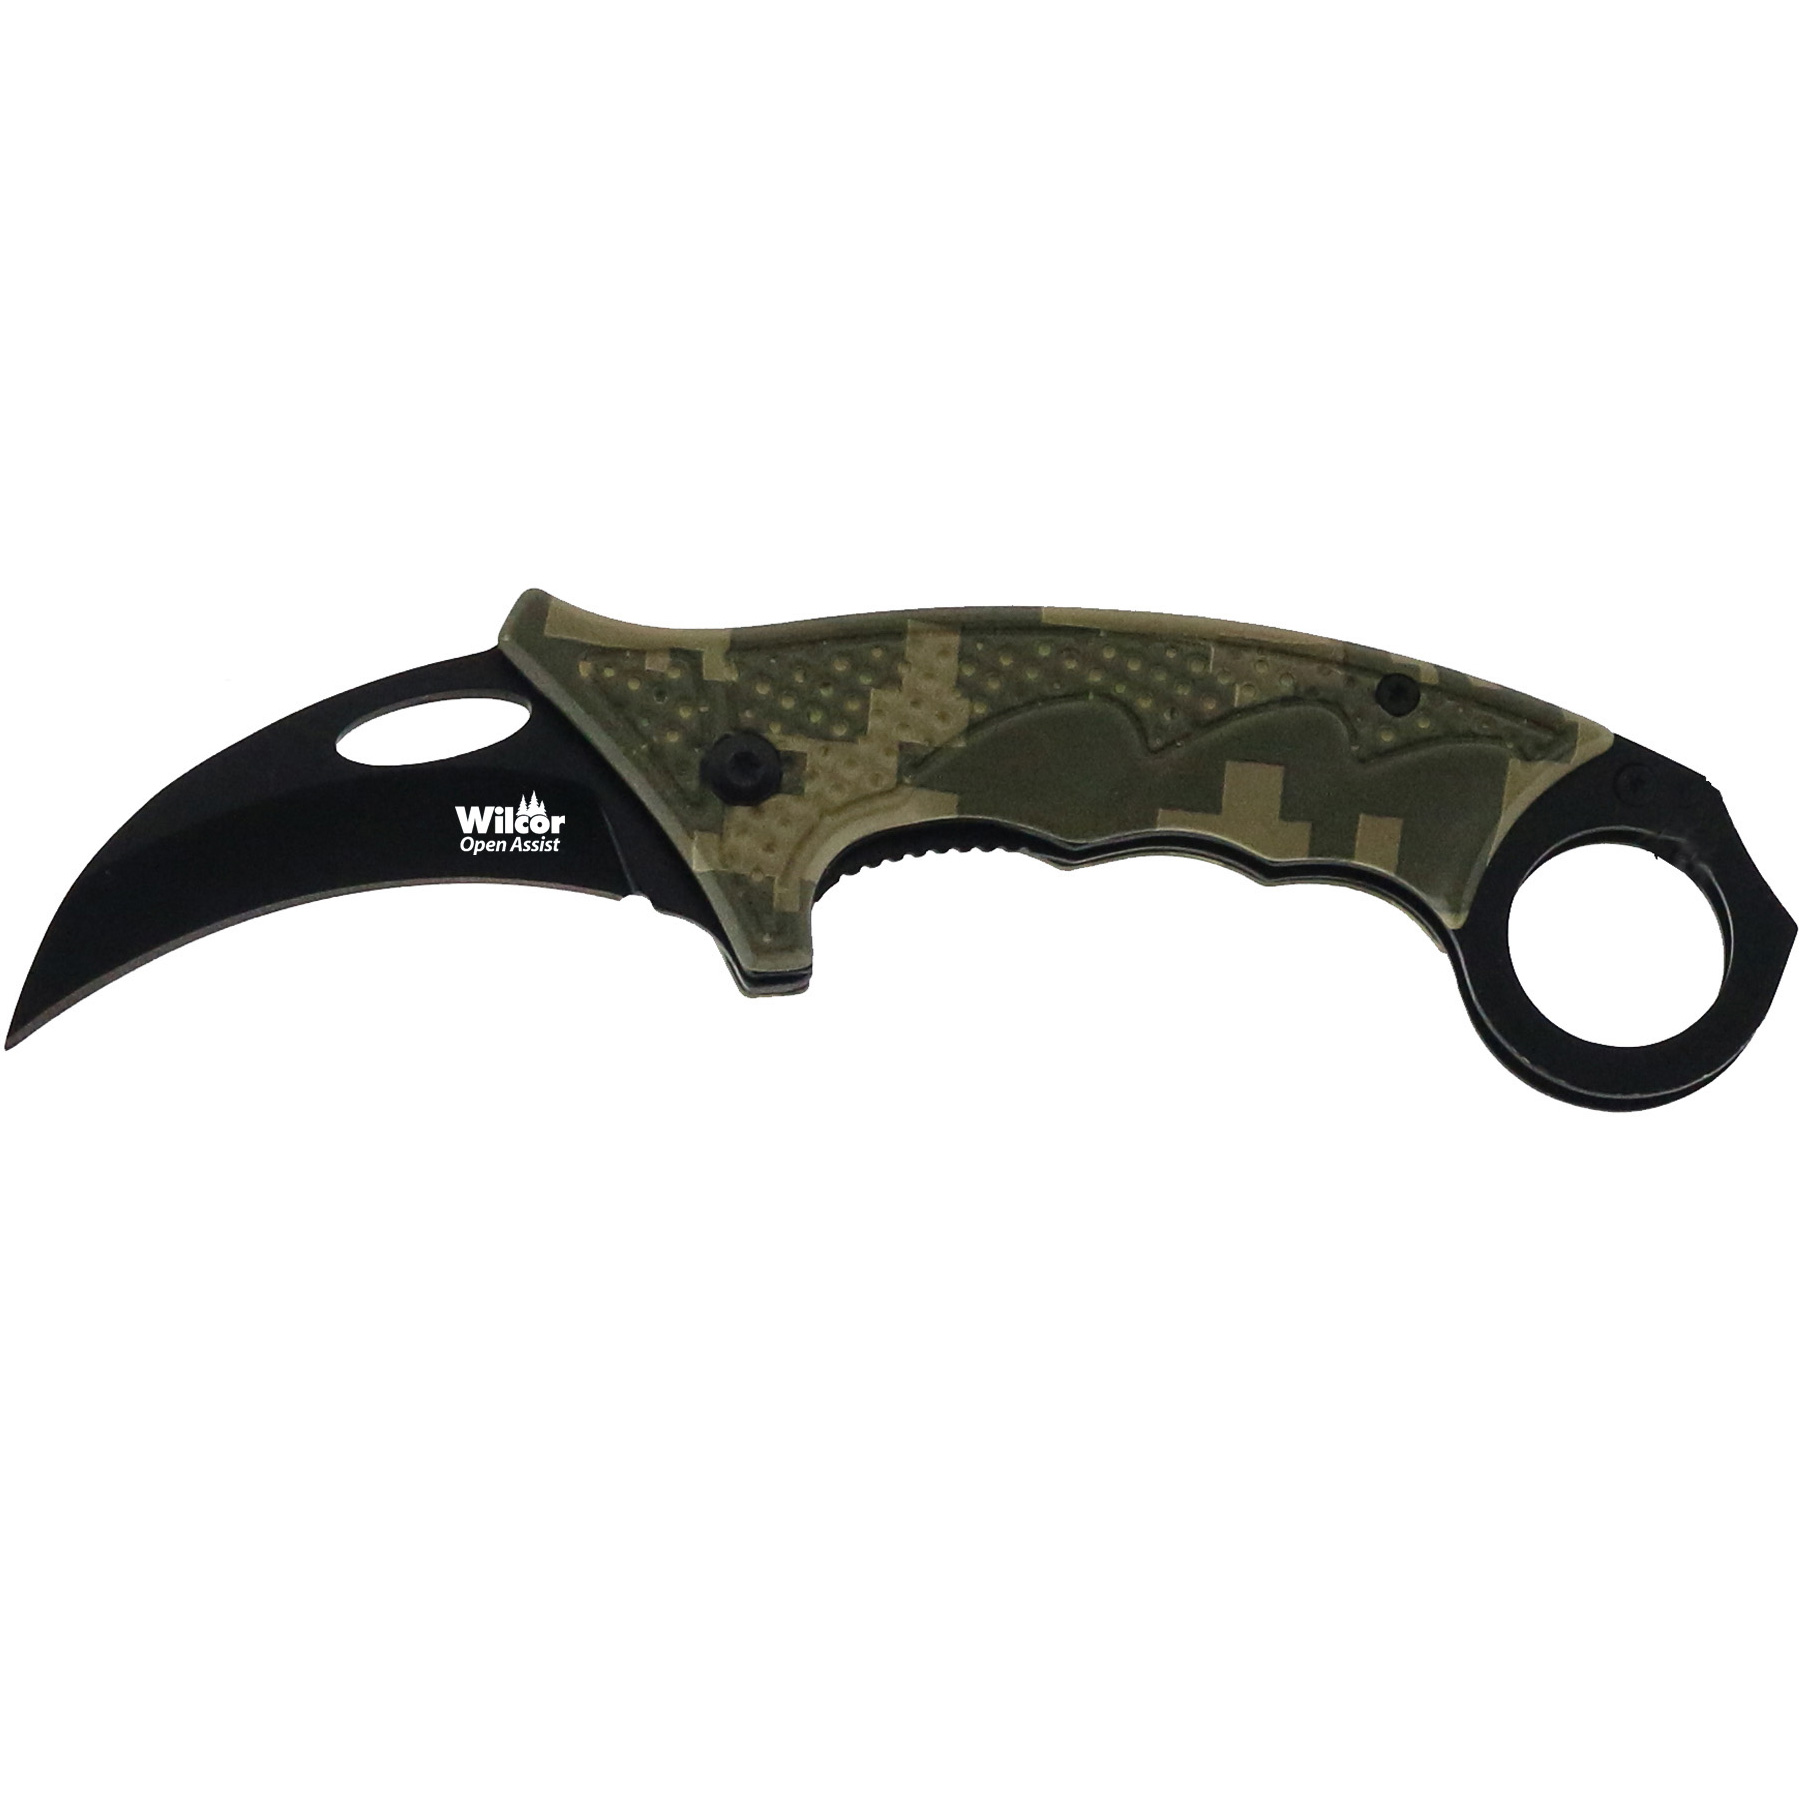 https://wilcor.net/productimages/msc2904_knife_claw_blade_camo.jpg